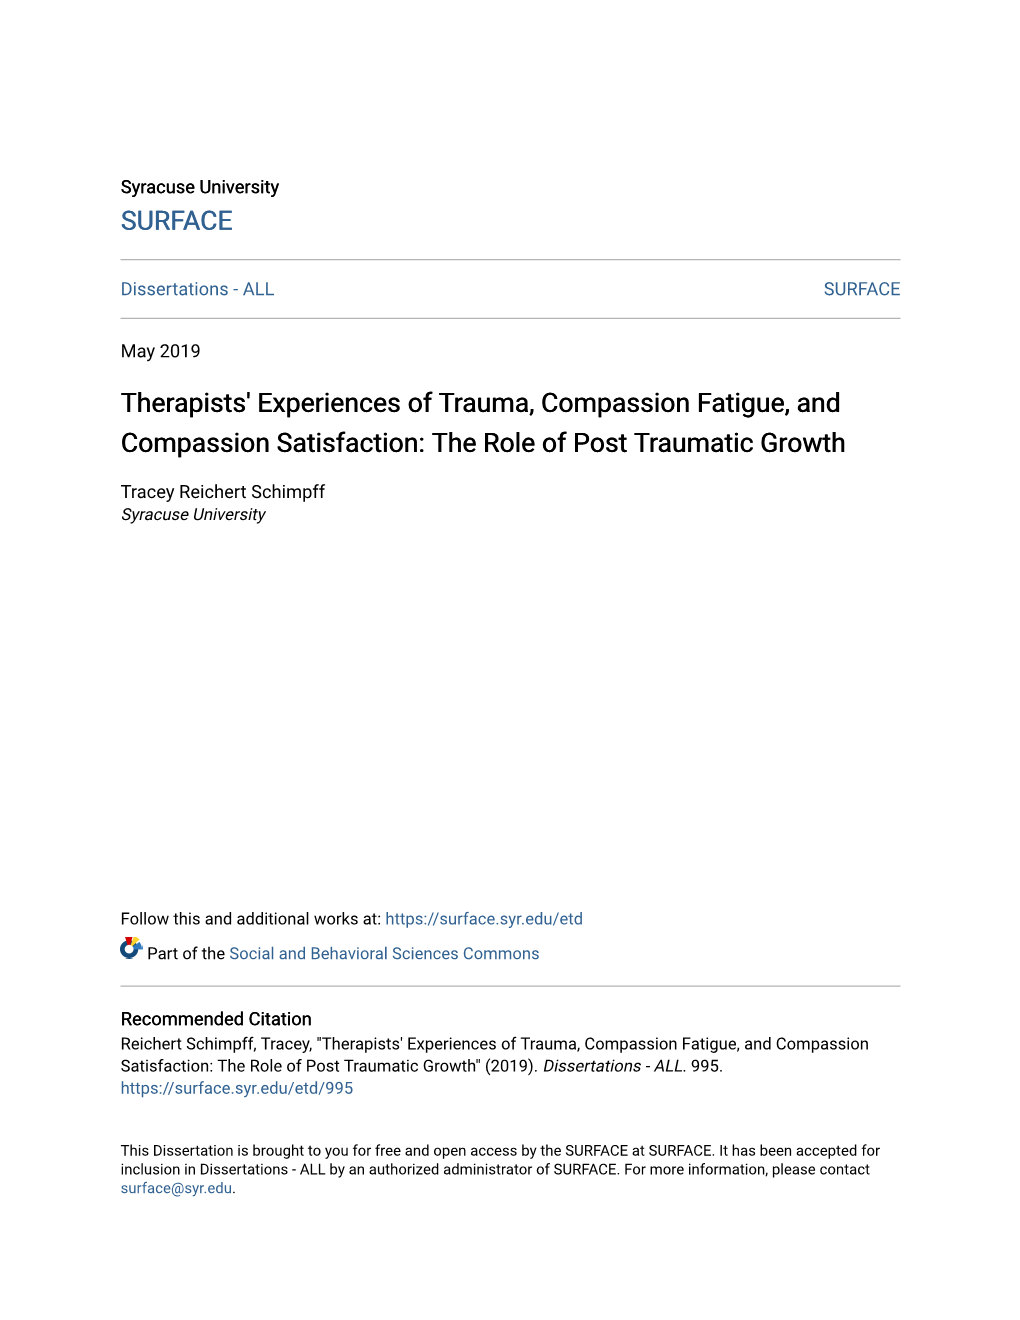 Therapists' Experiences of Trauma, Compassion Fatigue, and Compassion Satisfaction: the Role of Post Traumatic Growth